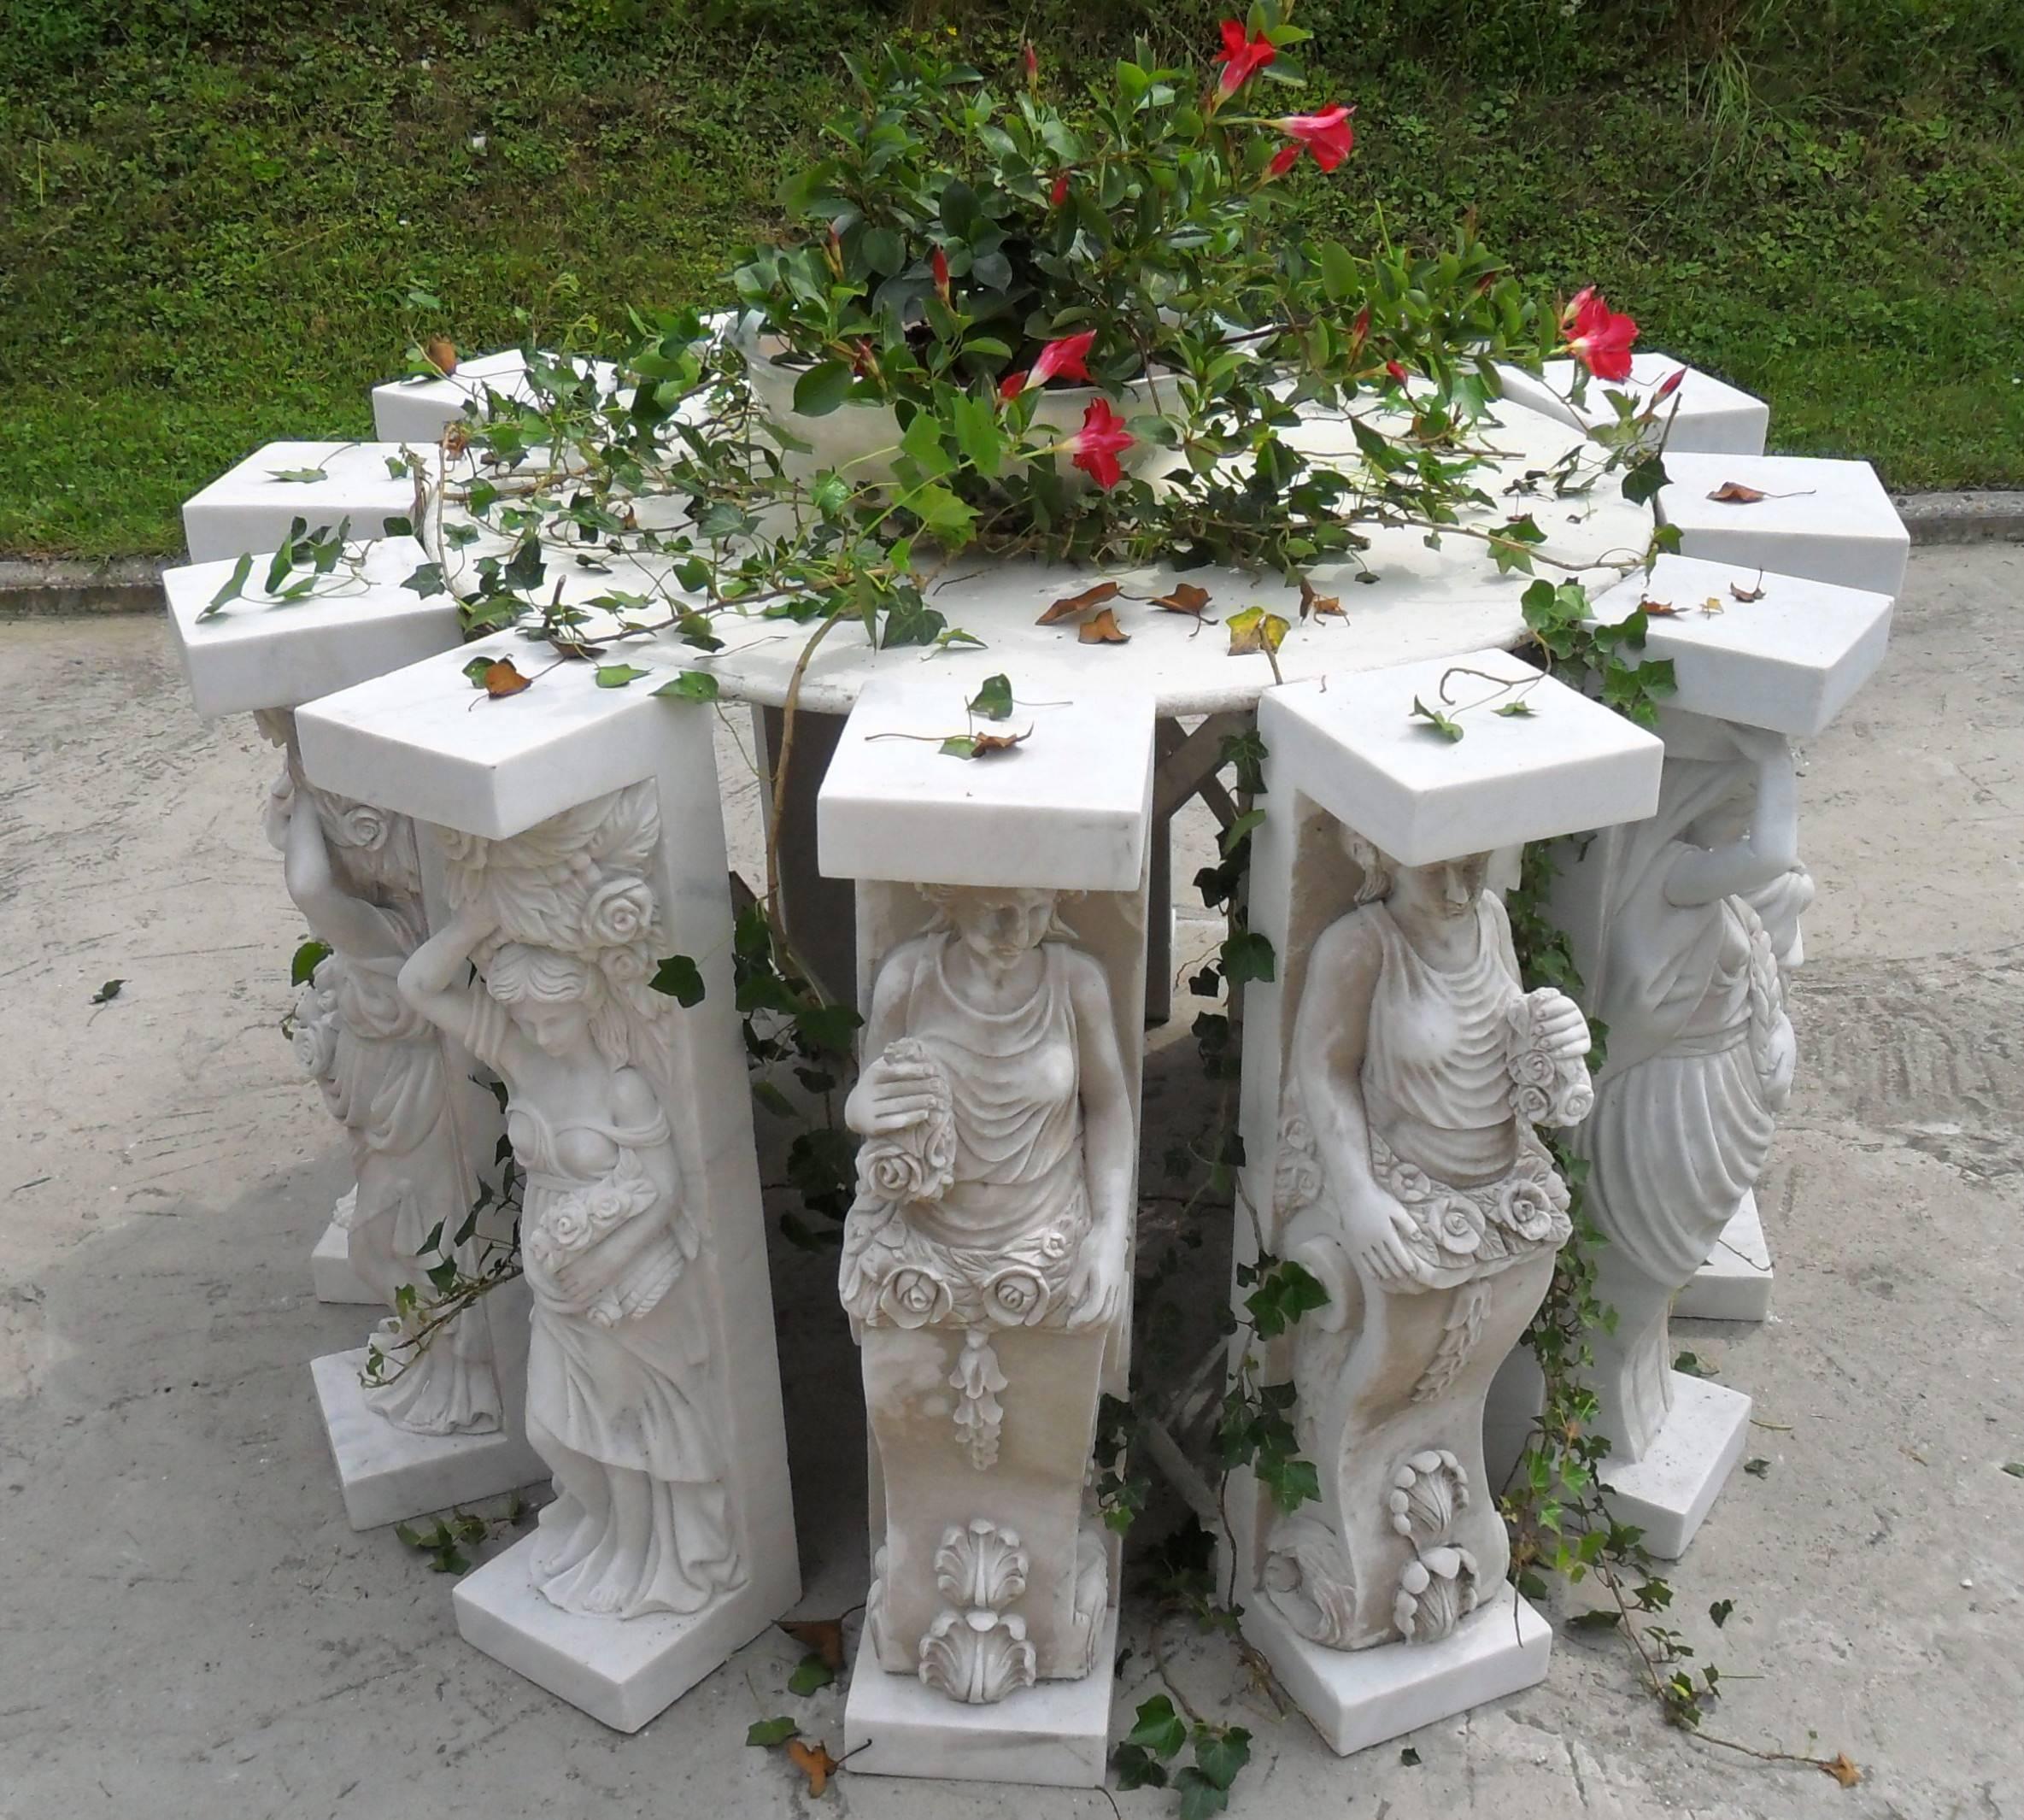 Medieval 1950-1970 Set of 12 Antique White Marble Statues